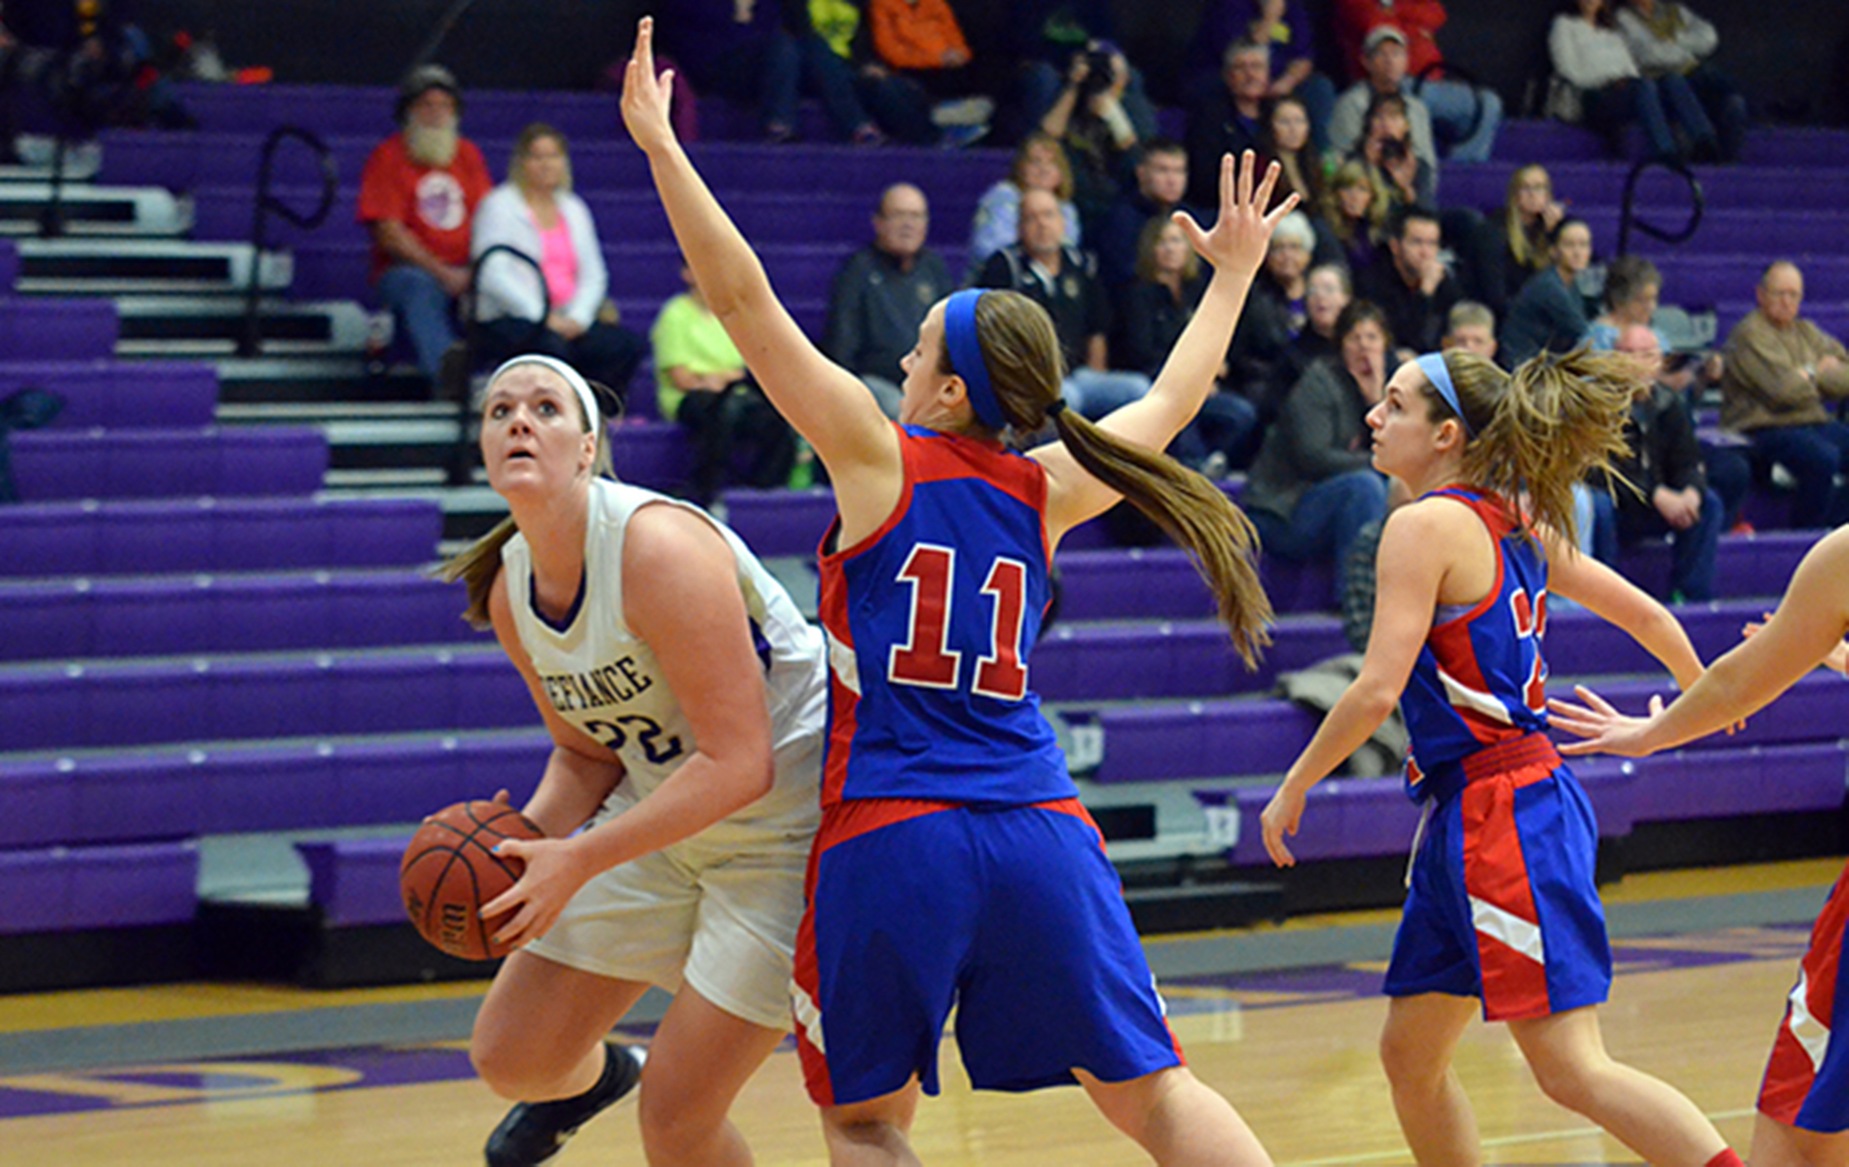 Tietje Scores 24 in Loss to Bluffton